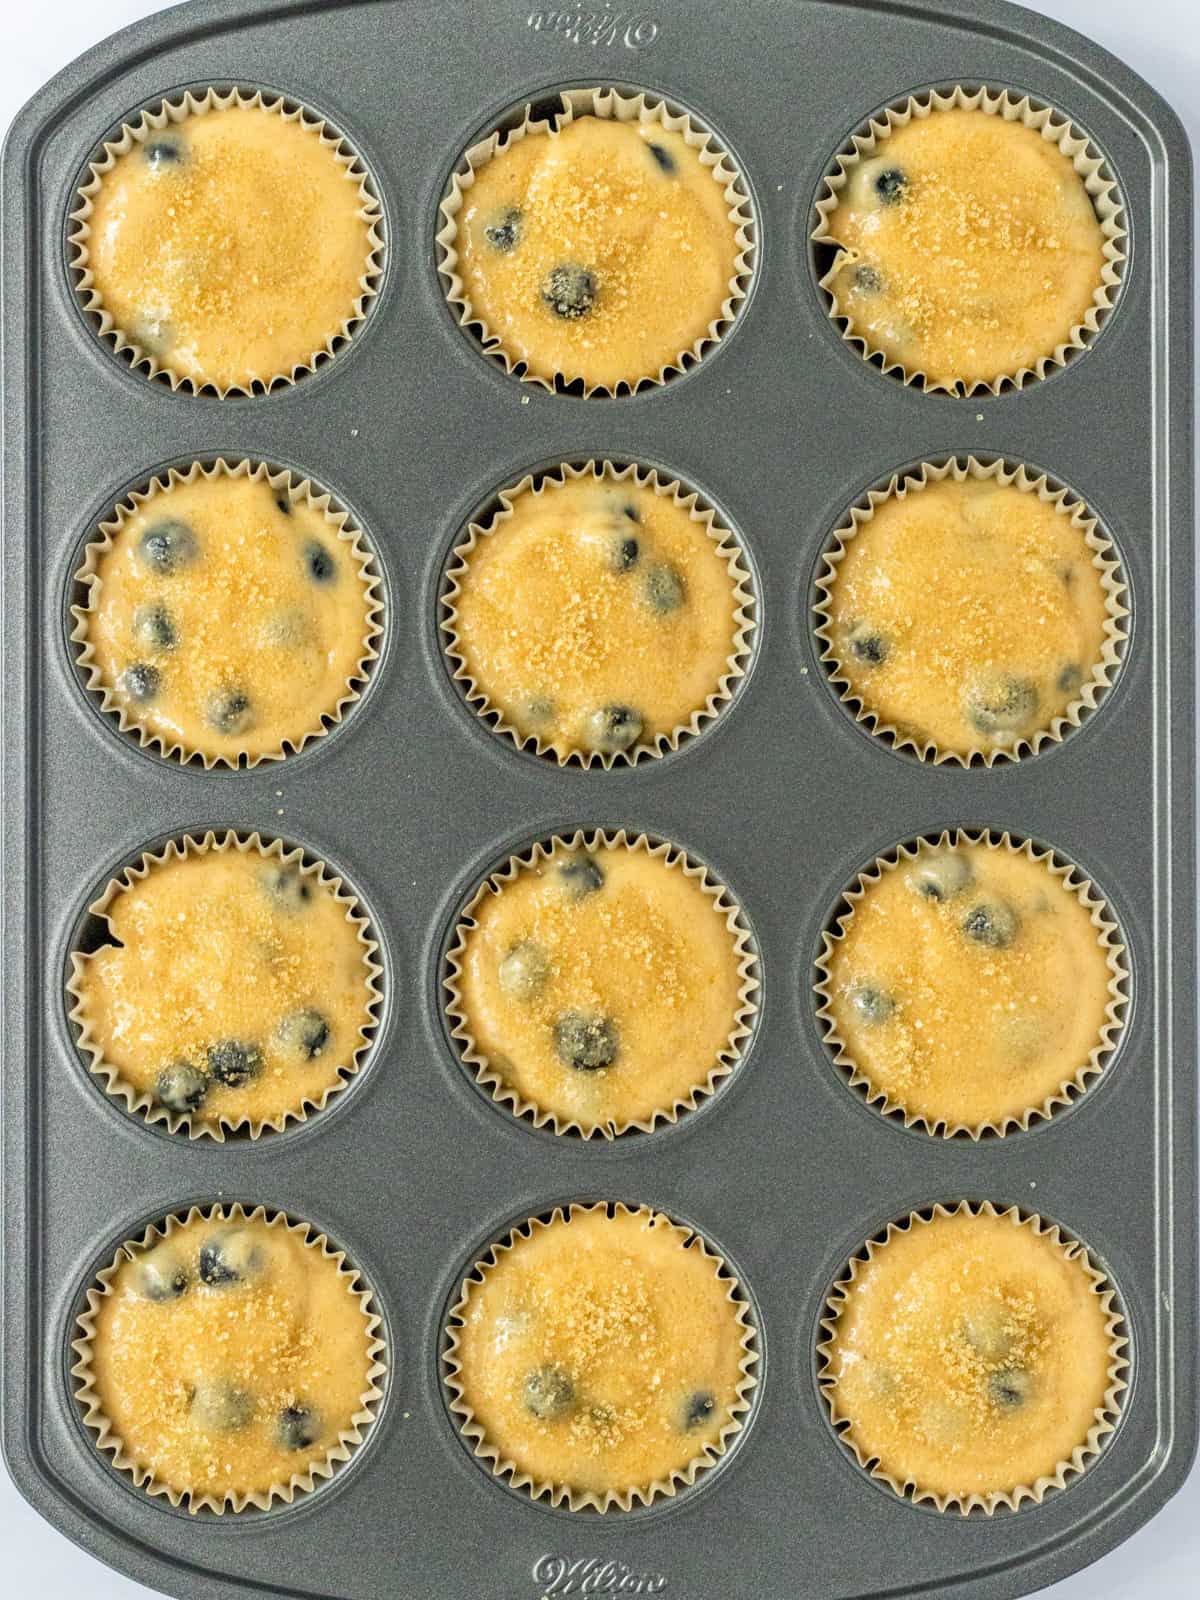 Blueberry muffin batter-filled liners in a muffin pan topped with coarse sugar.